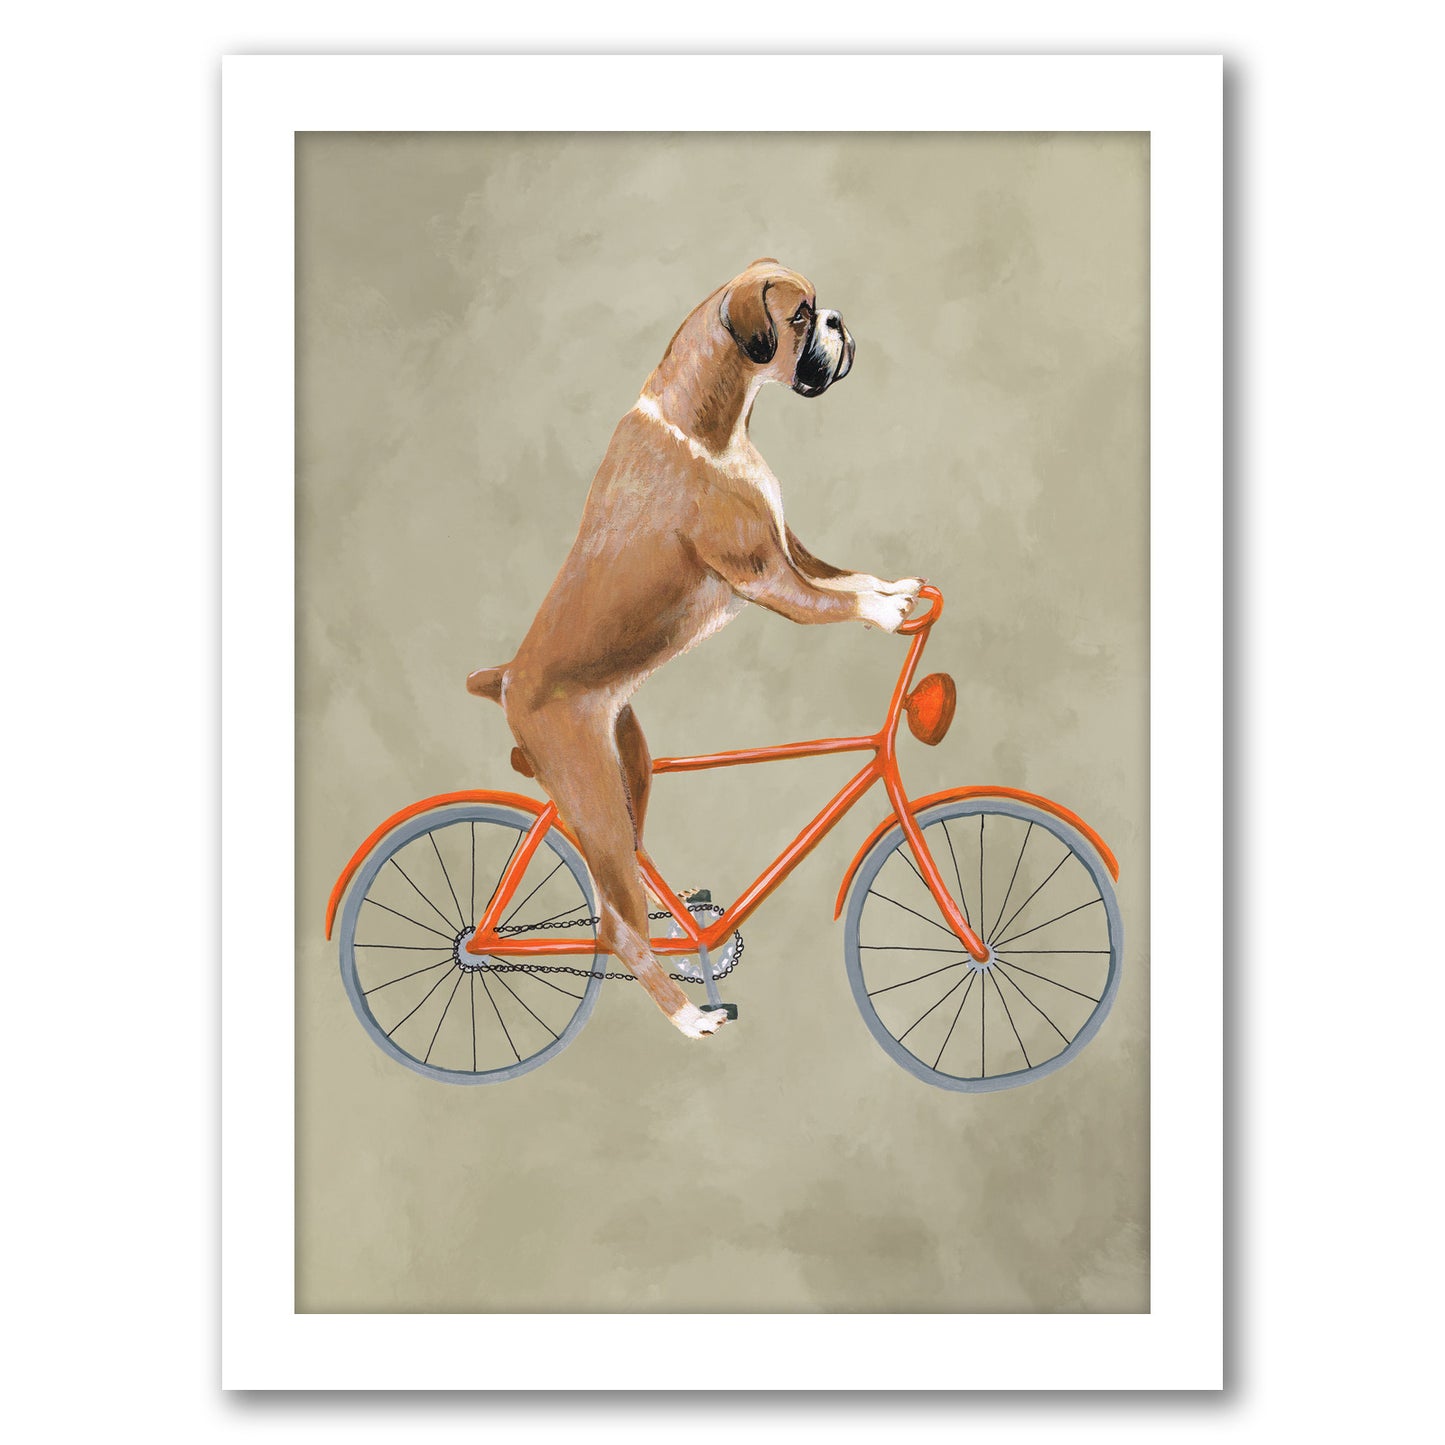 Boxer On Bicycle By Coco De Paris - Framed Print